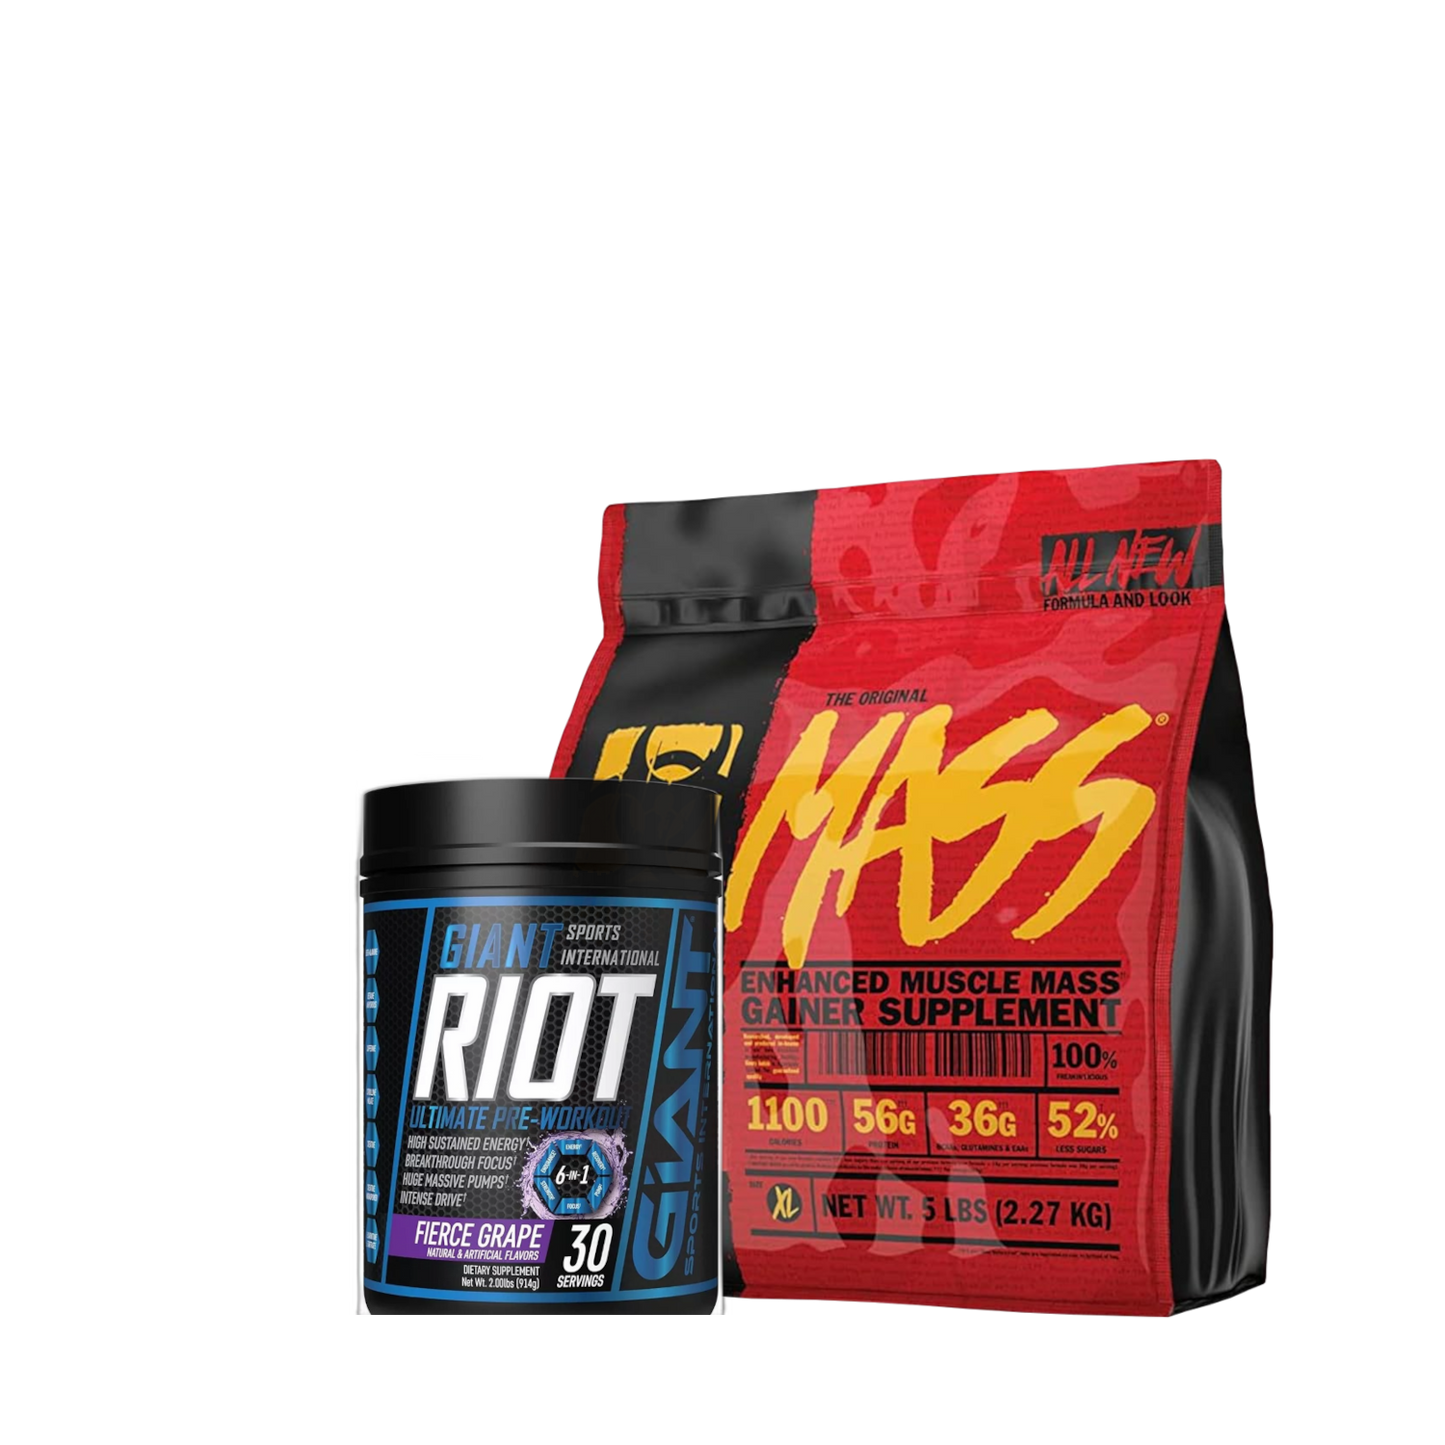 Mutant Whey 15lbs + Giant Riot 2lbs